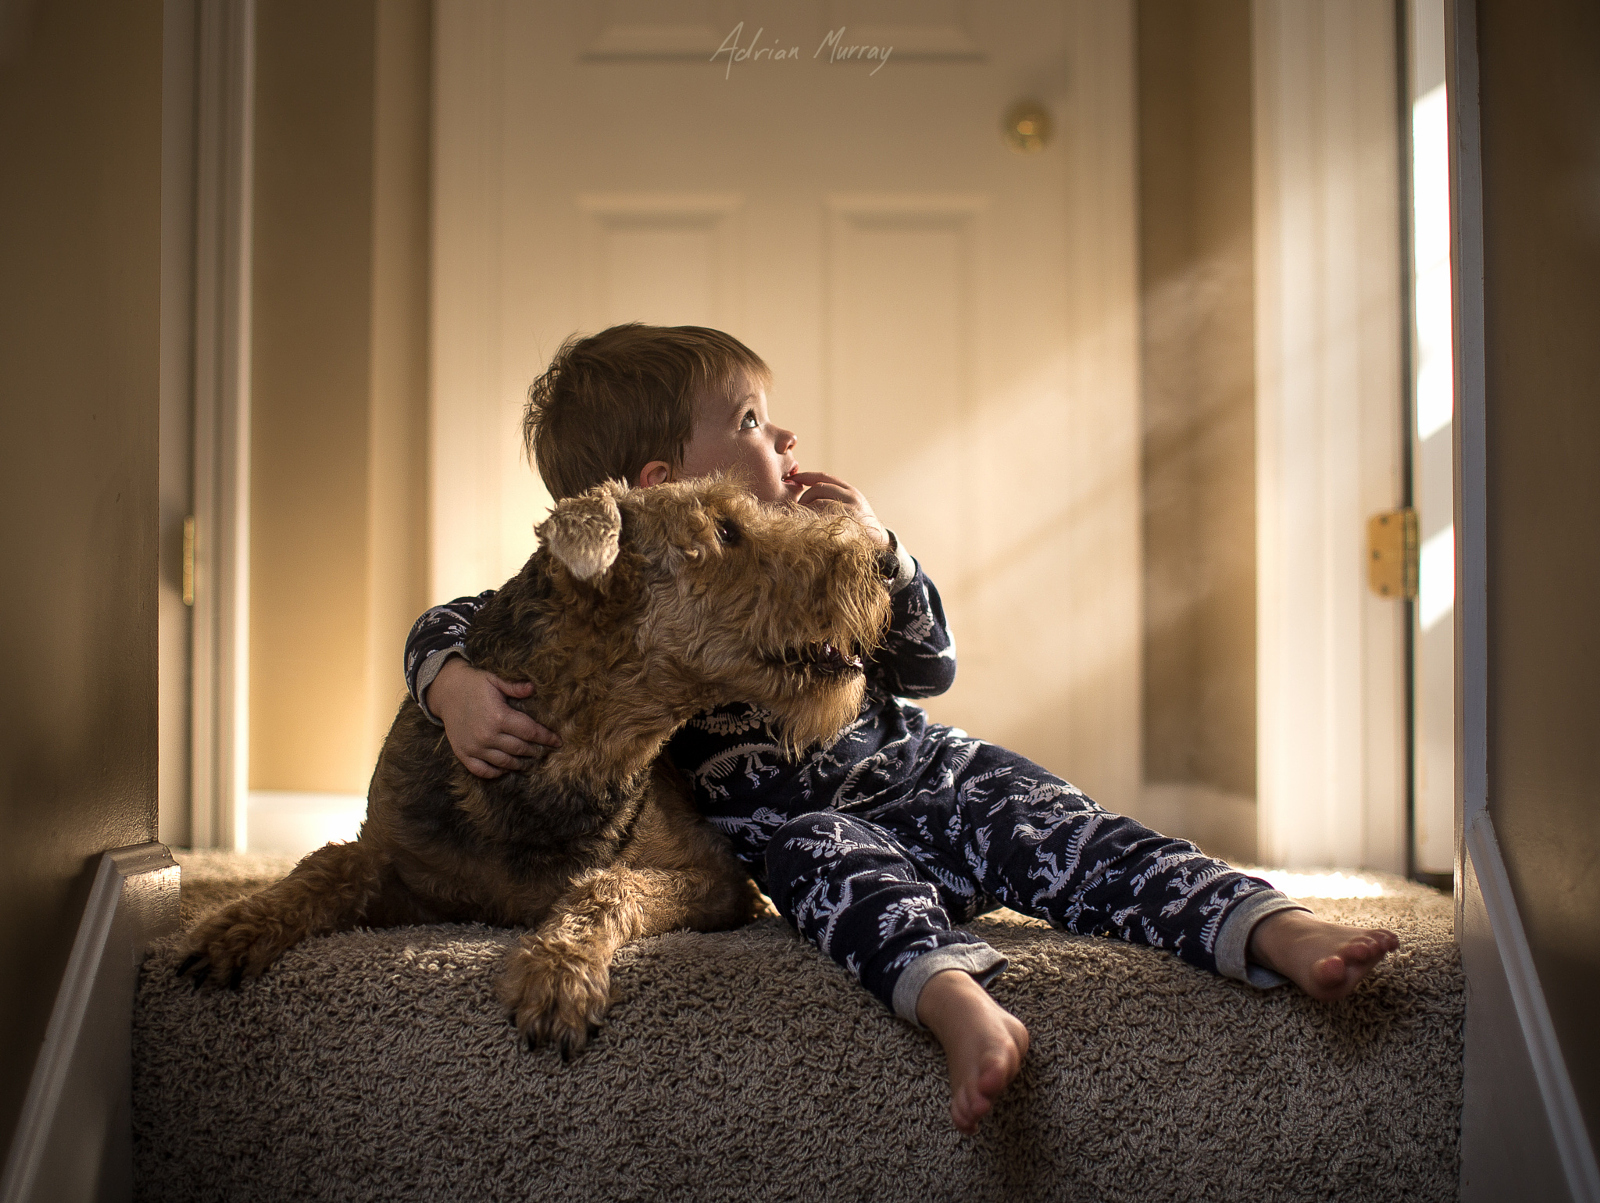 How to Use the Natural Light in Your Home to Capture Amazing Lifestyle Photos